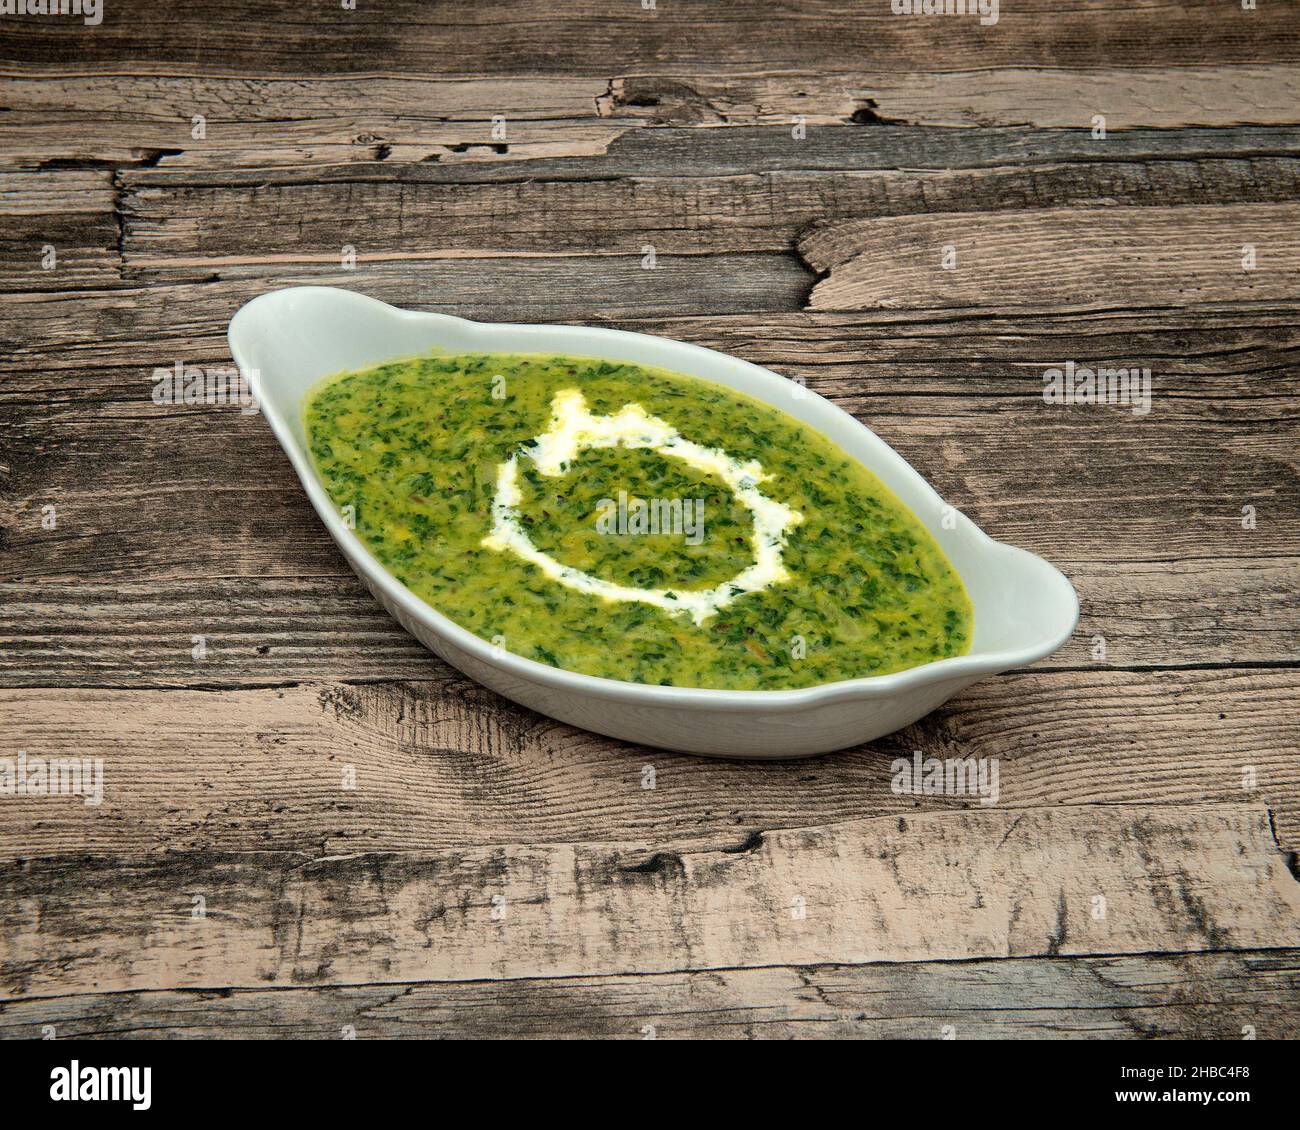 Spinach lentil Indian food Stock Photo